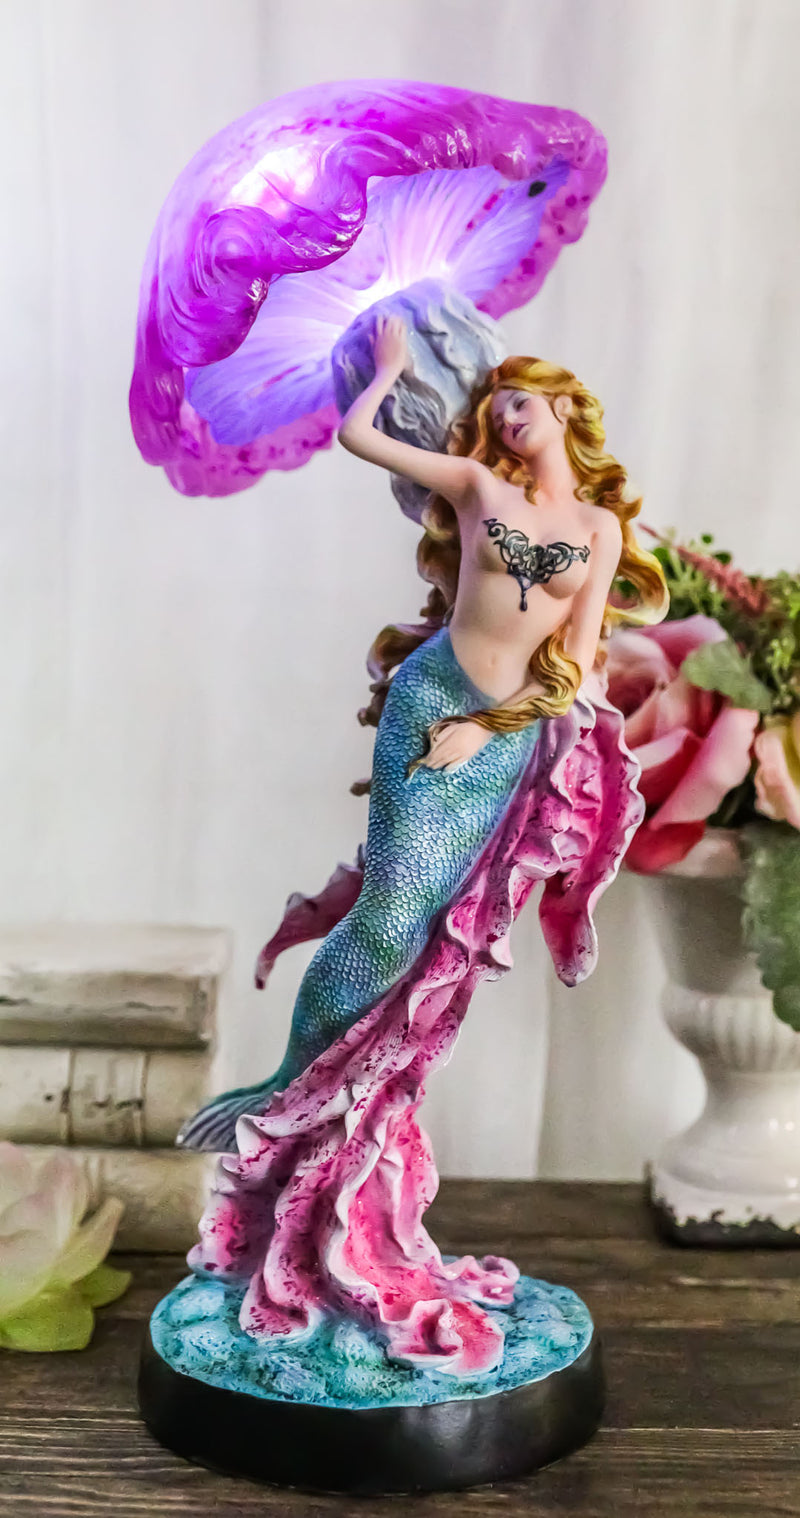 Large 17.25"H Mermaid With Pink Jellyfish Statue With Colorful LED Light